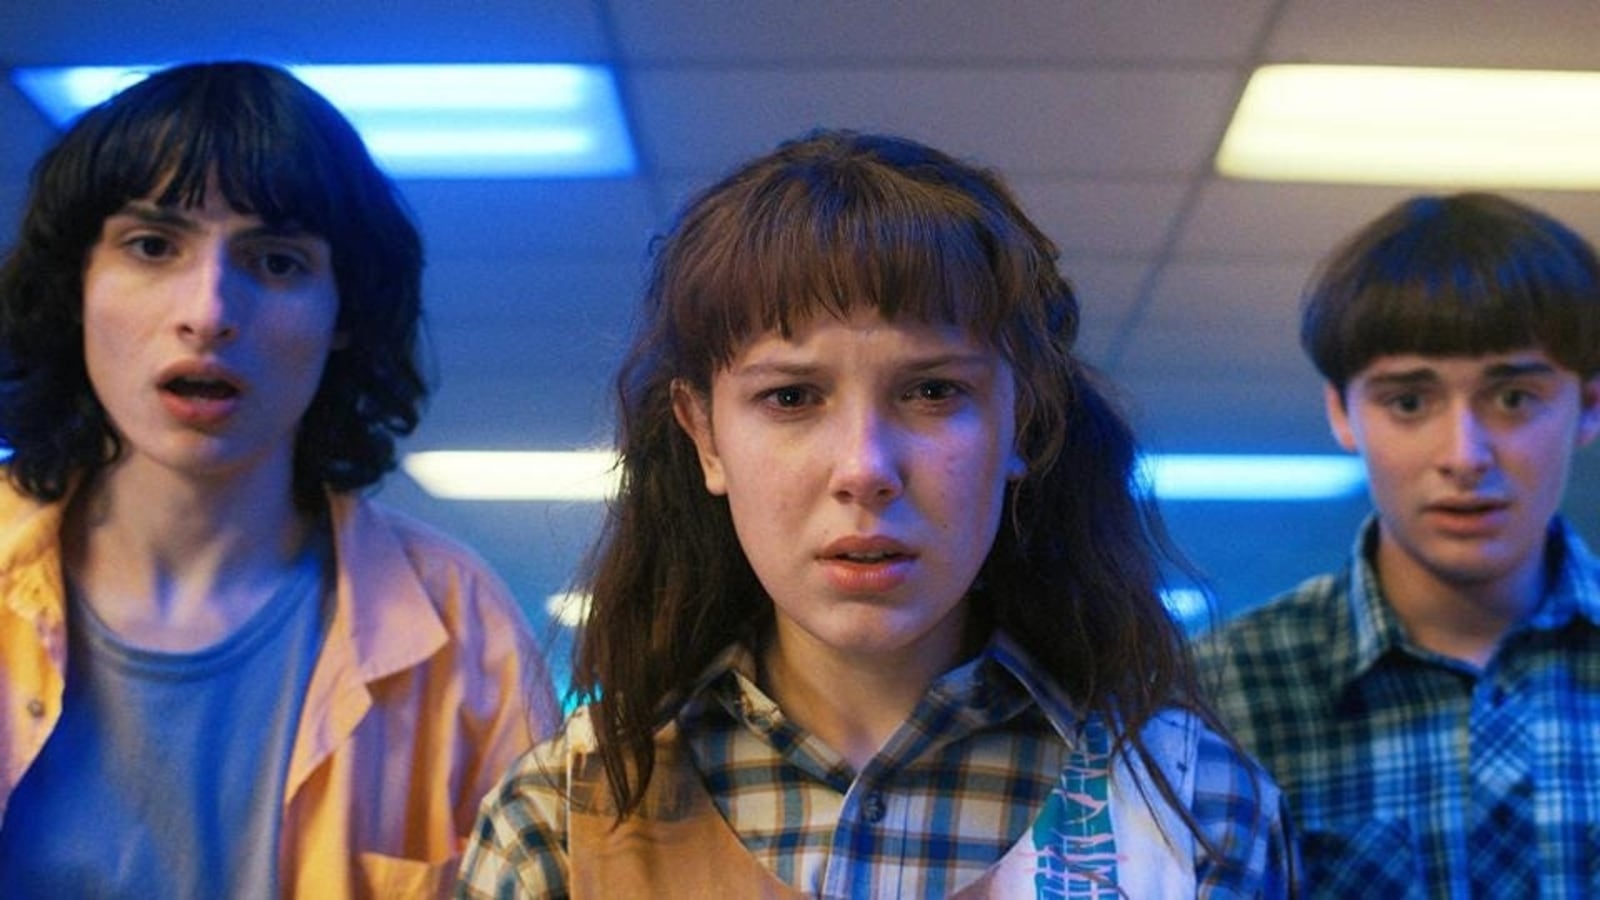 Stranger Things Season 4 Volume 1: 7 Major Questions We Have While